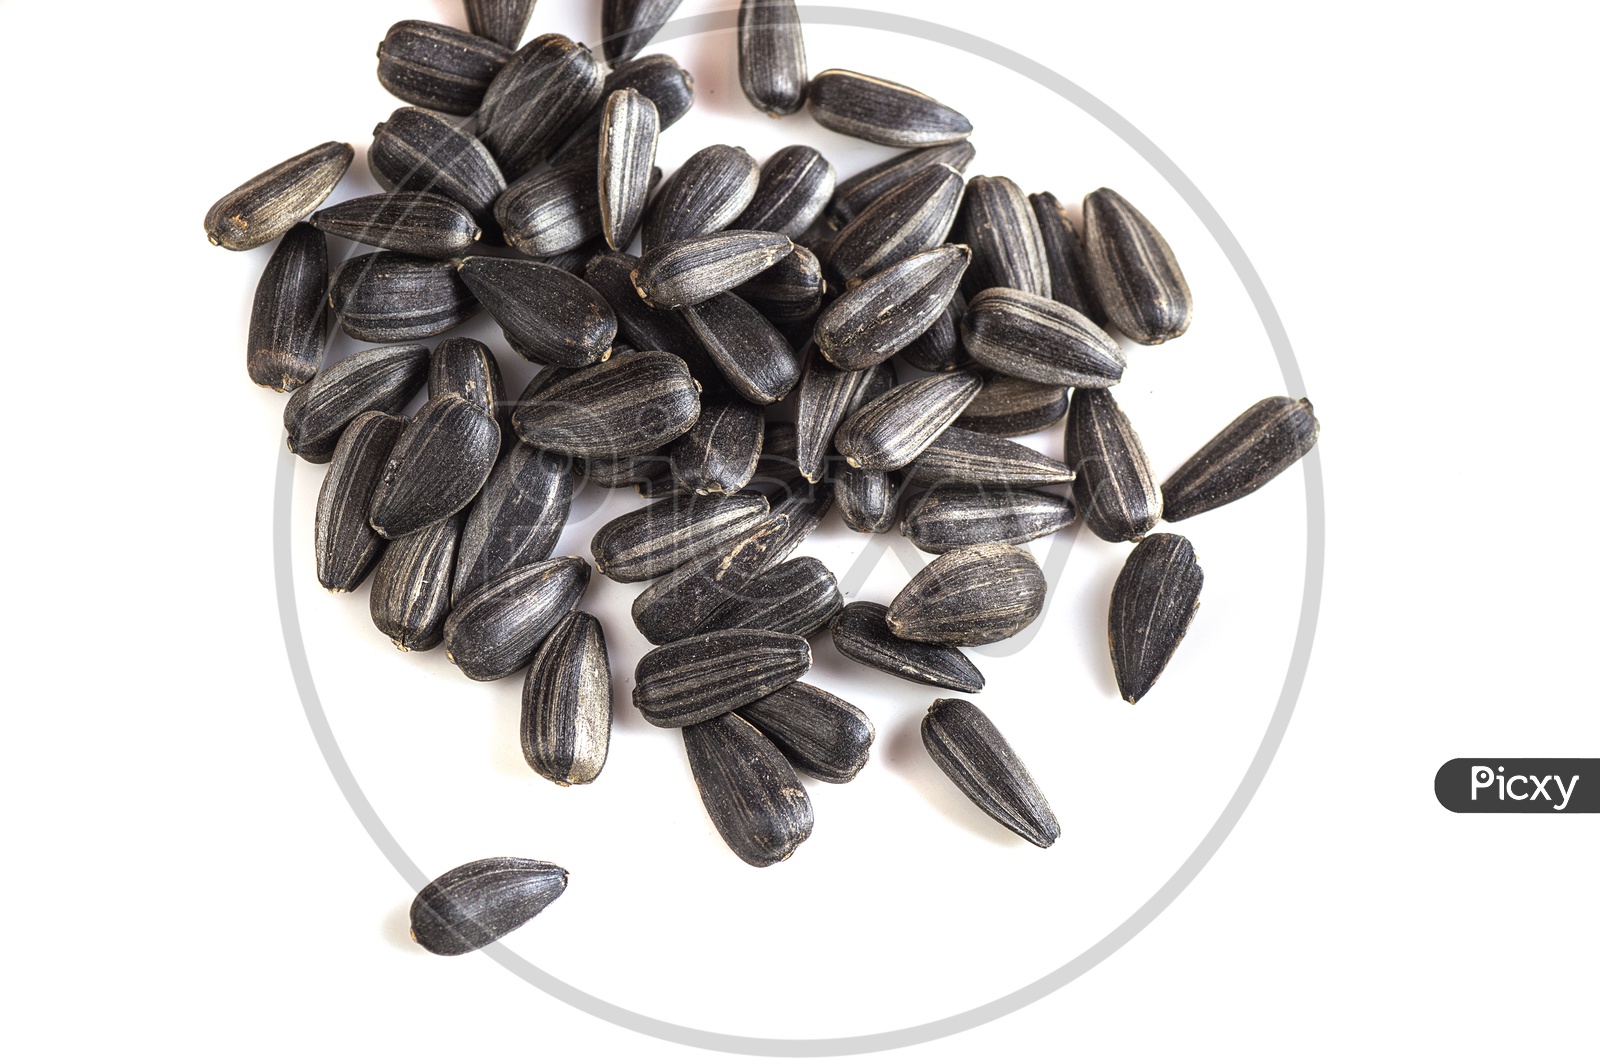 Sunflower seeds on a isolated white background